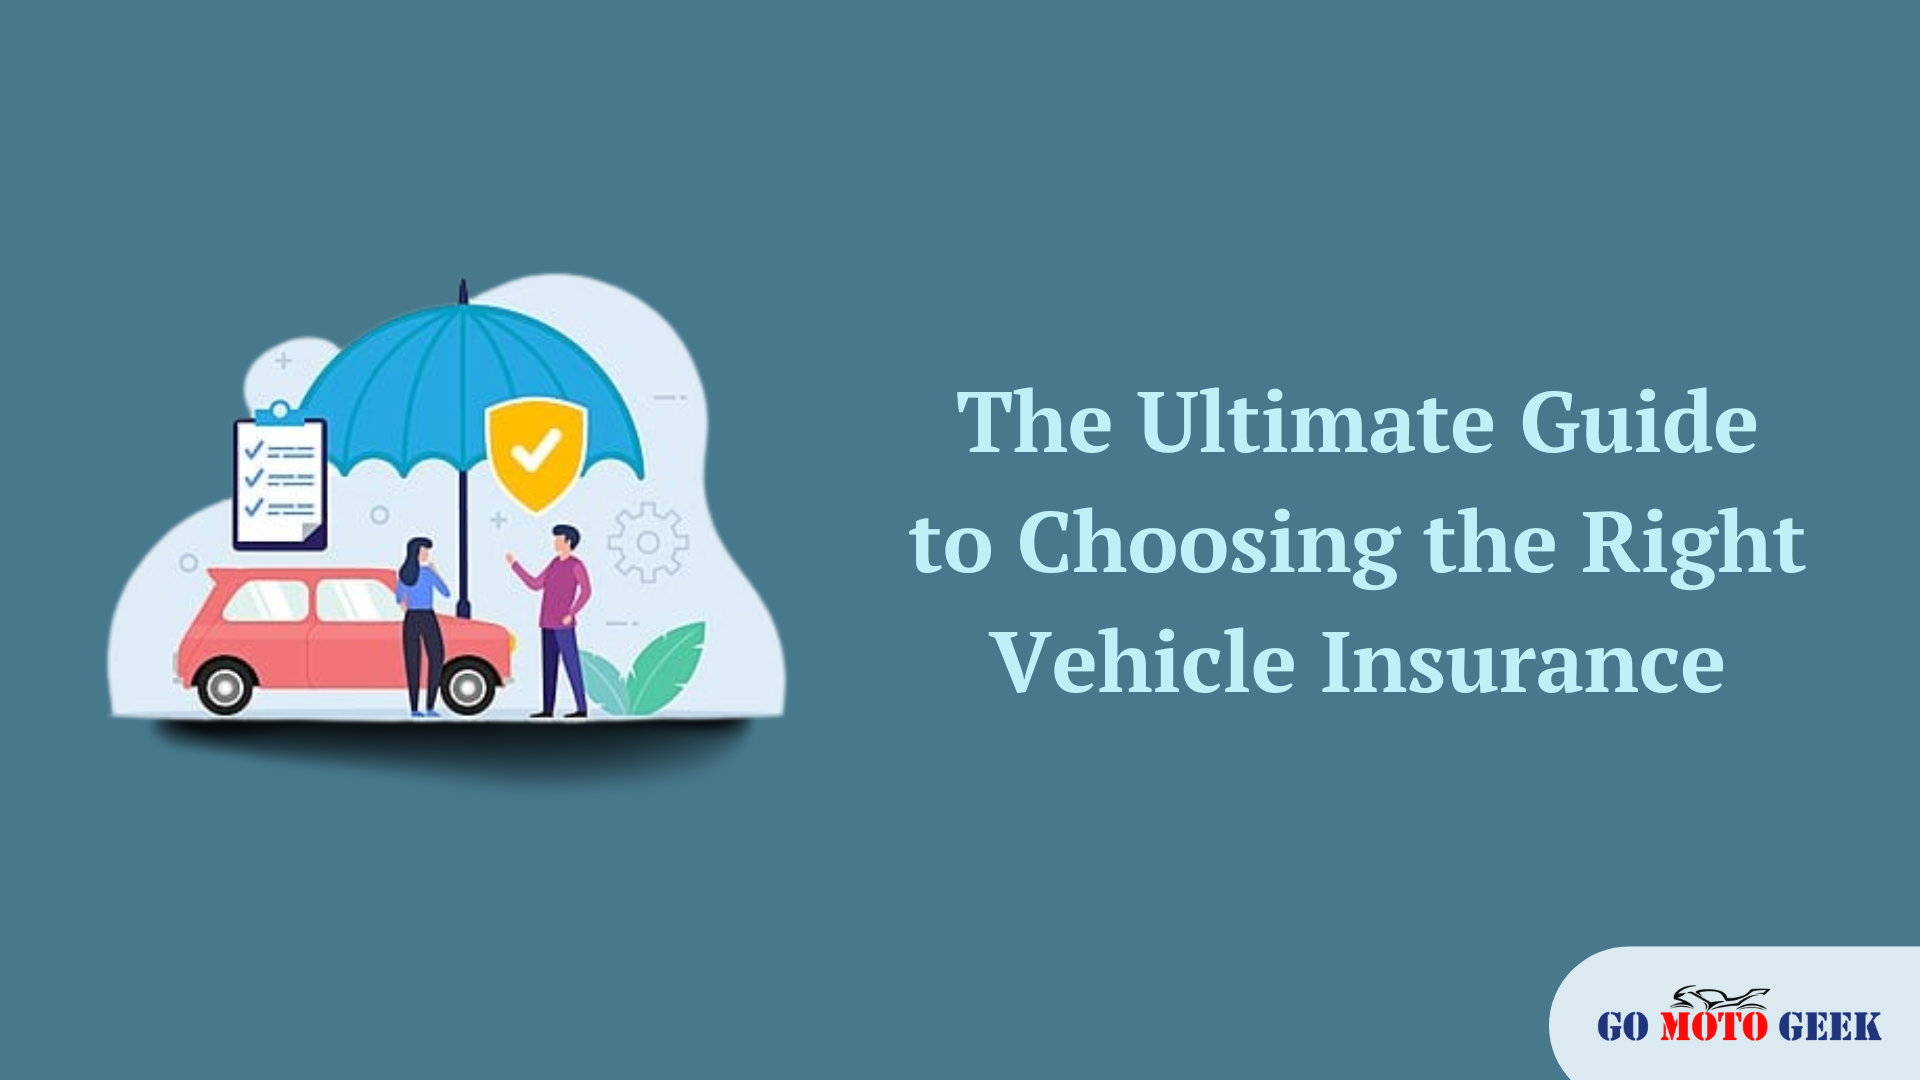 The Ultimate Guide to Choosing the Right Vehicle Insurance